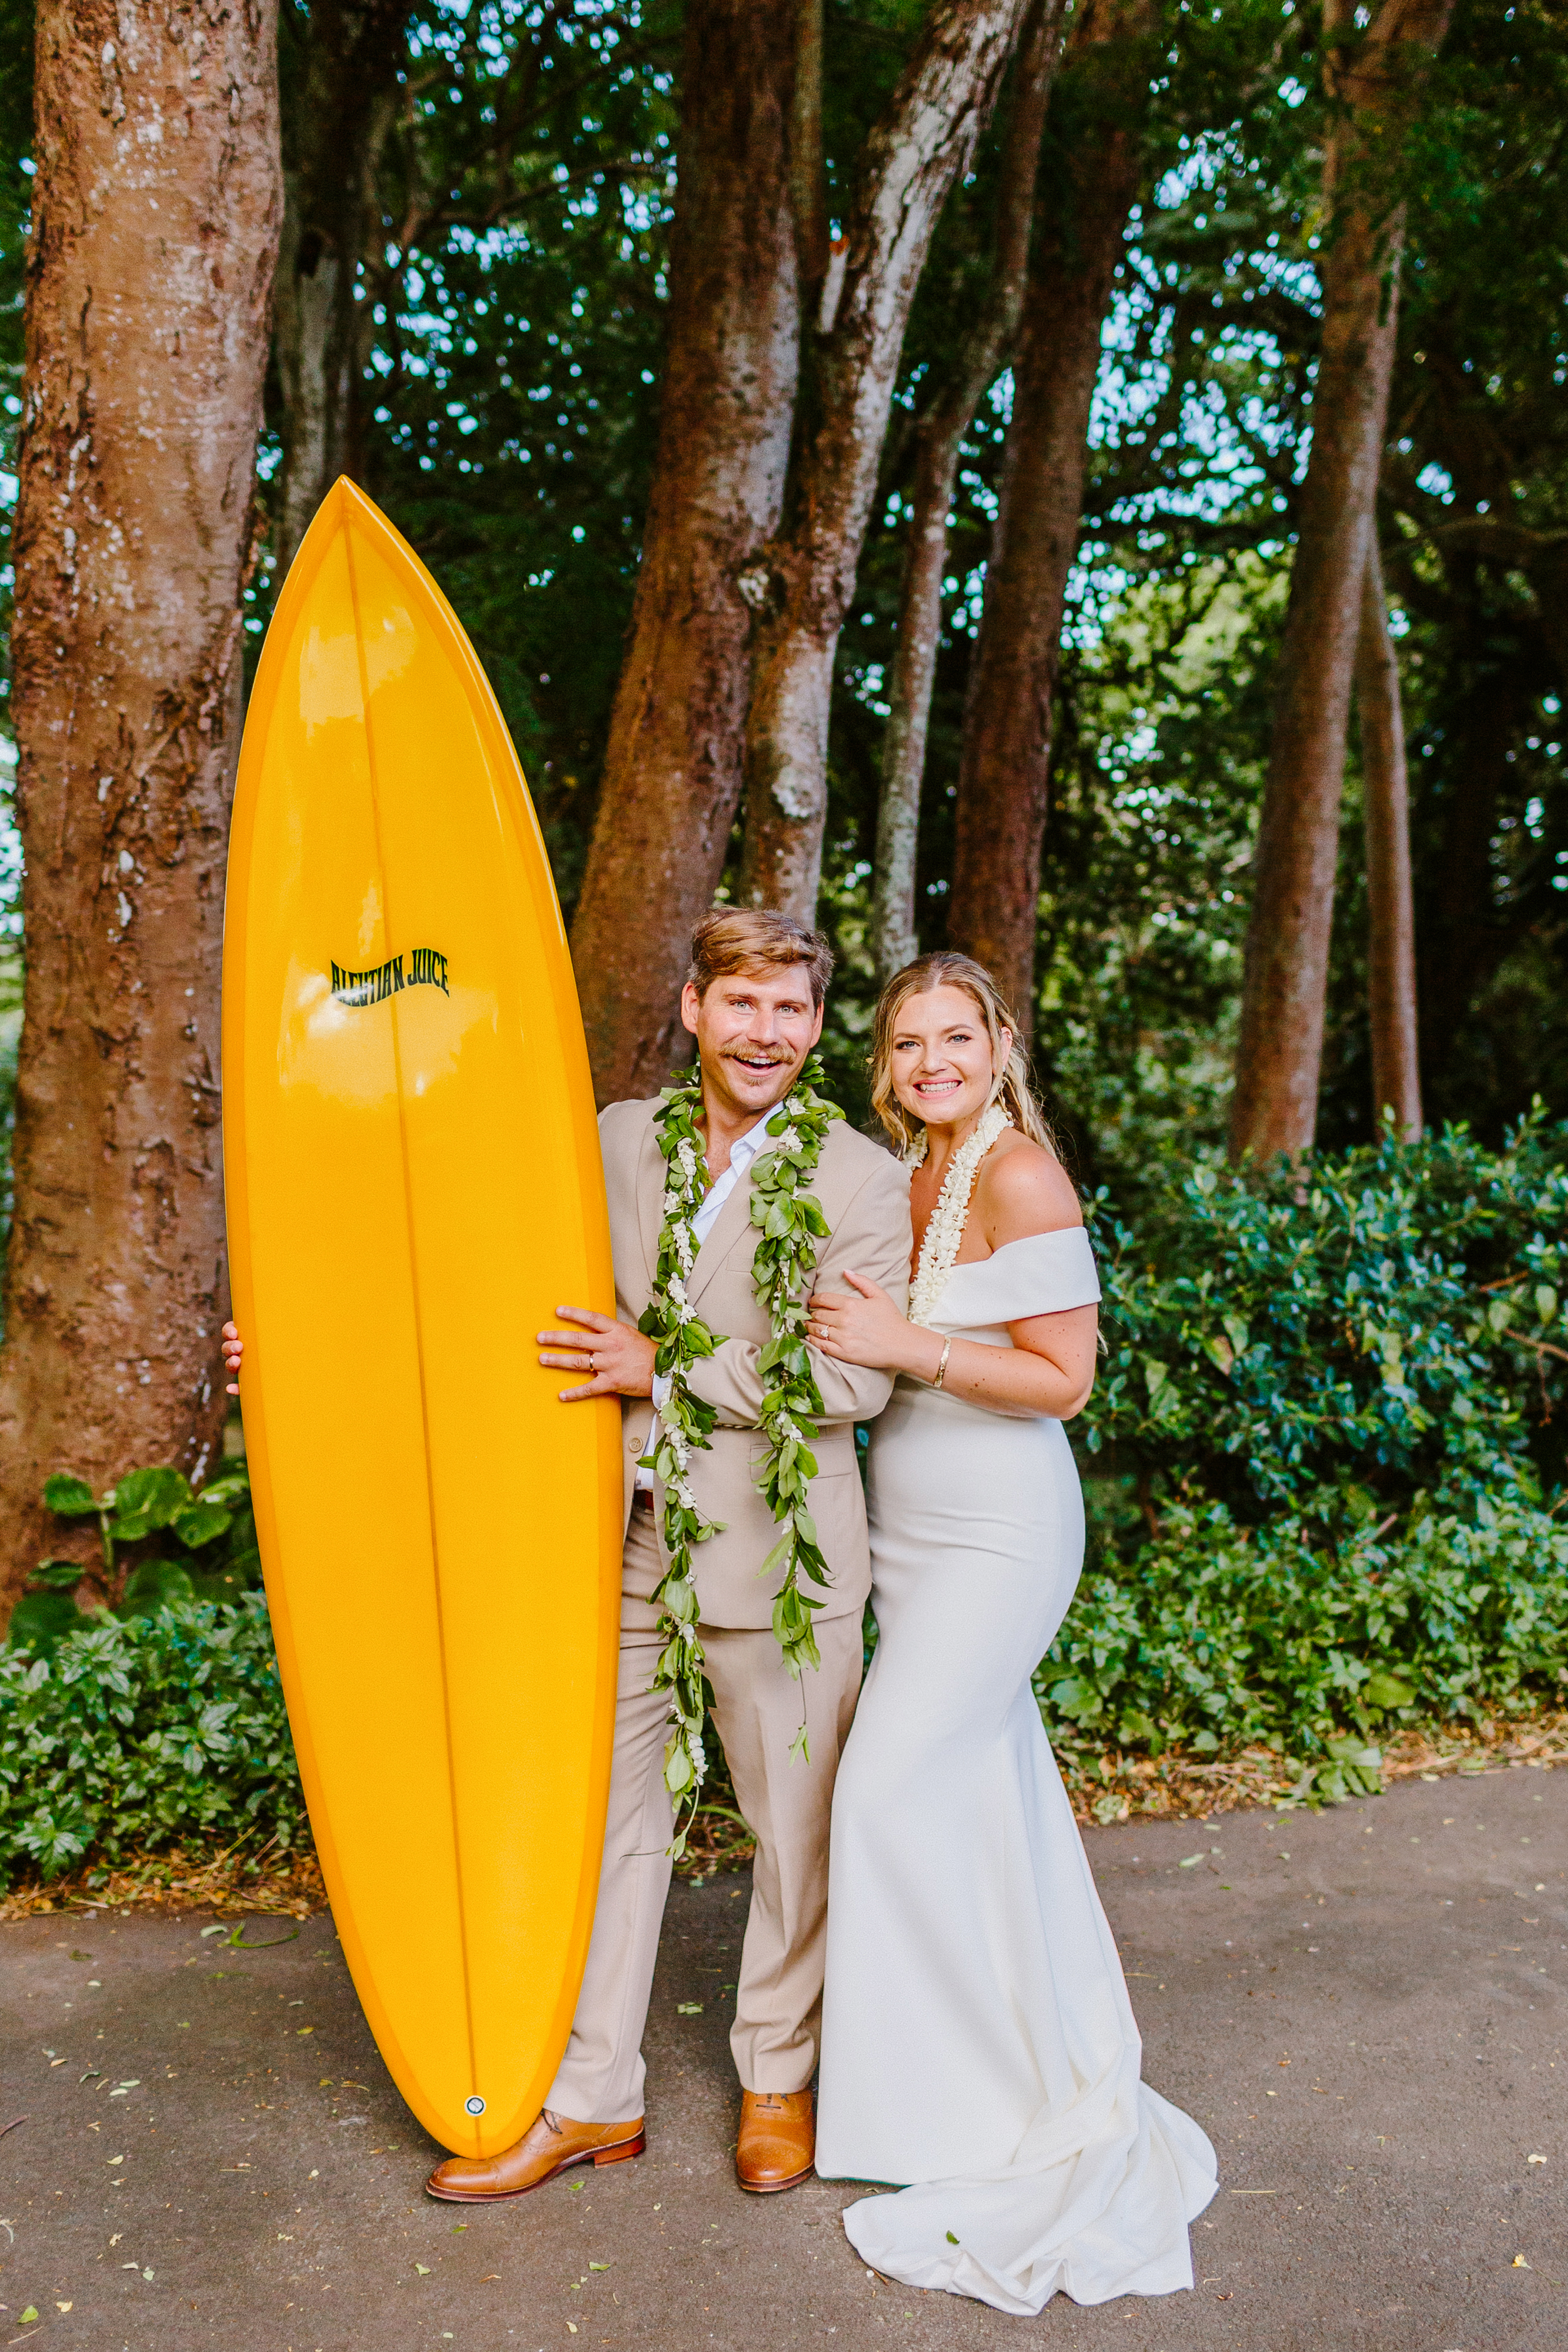 Bride and groom with yellow surfboard